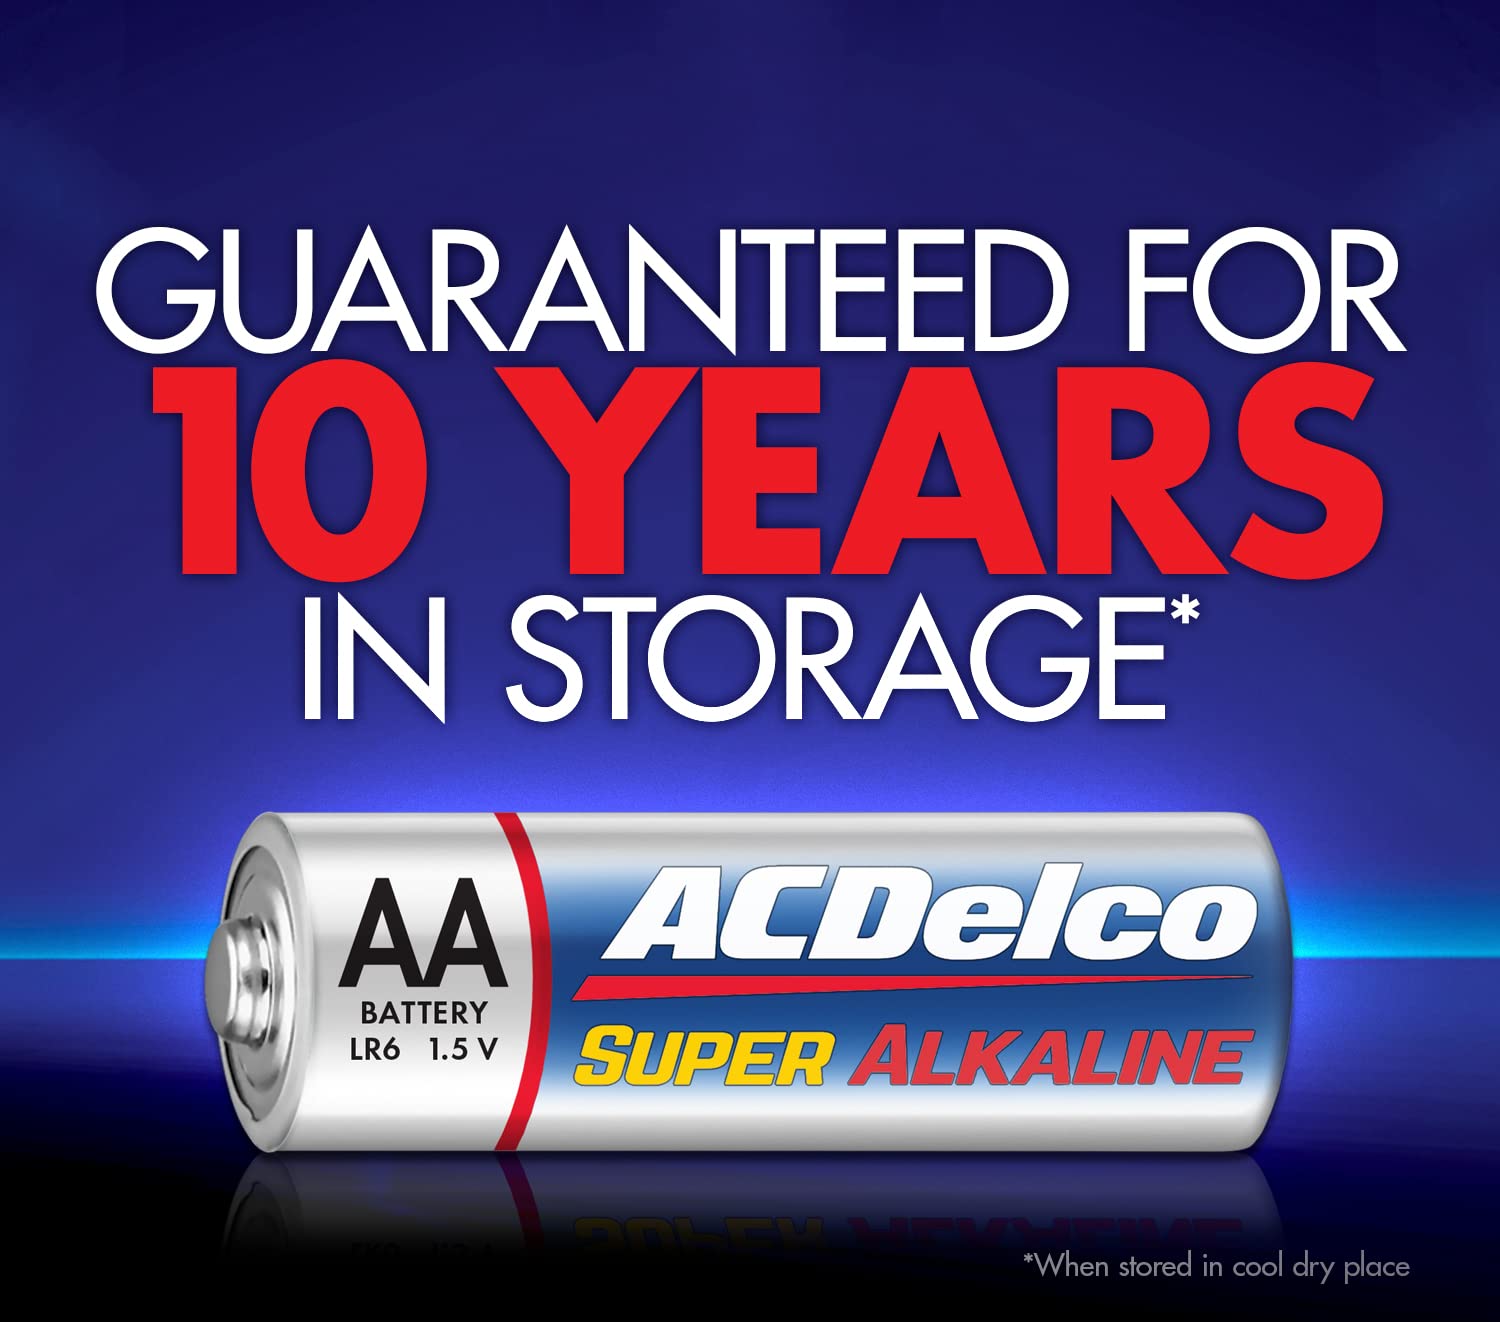 ACDelco 60-Count AA Batteries, Maximum Power Super Alkaline Battery, 10-Year Shelf Life, Recloseable Packaging (Pack of 1)